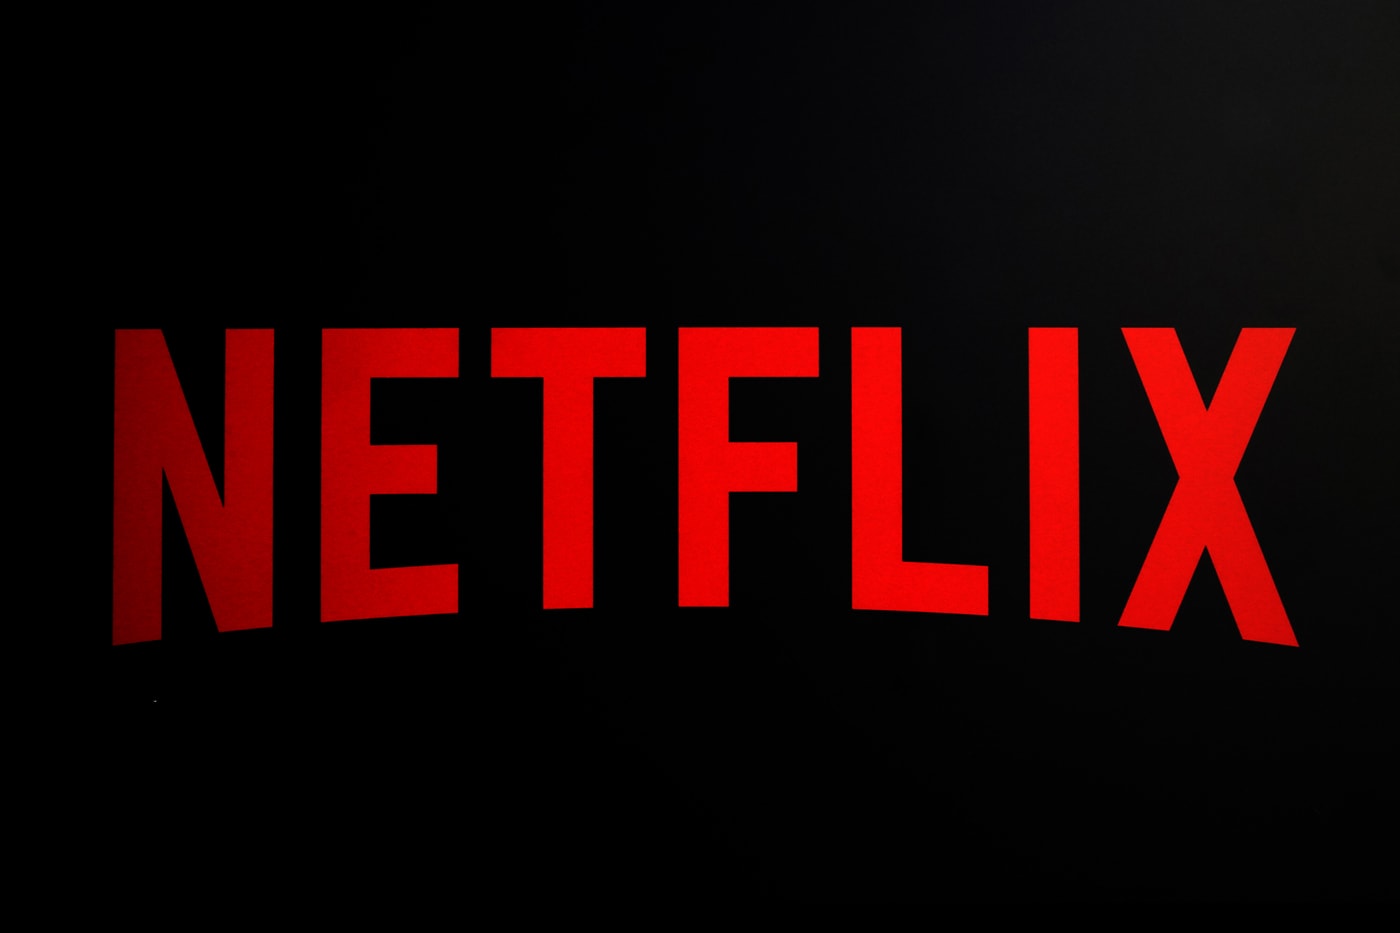 Netflix Adds 5 9 million New Subscribers after password sharing clampdown